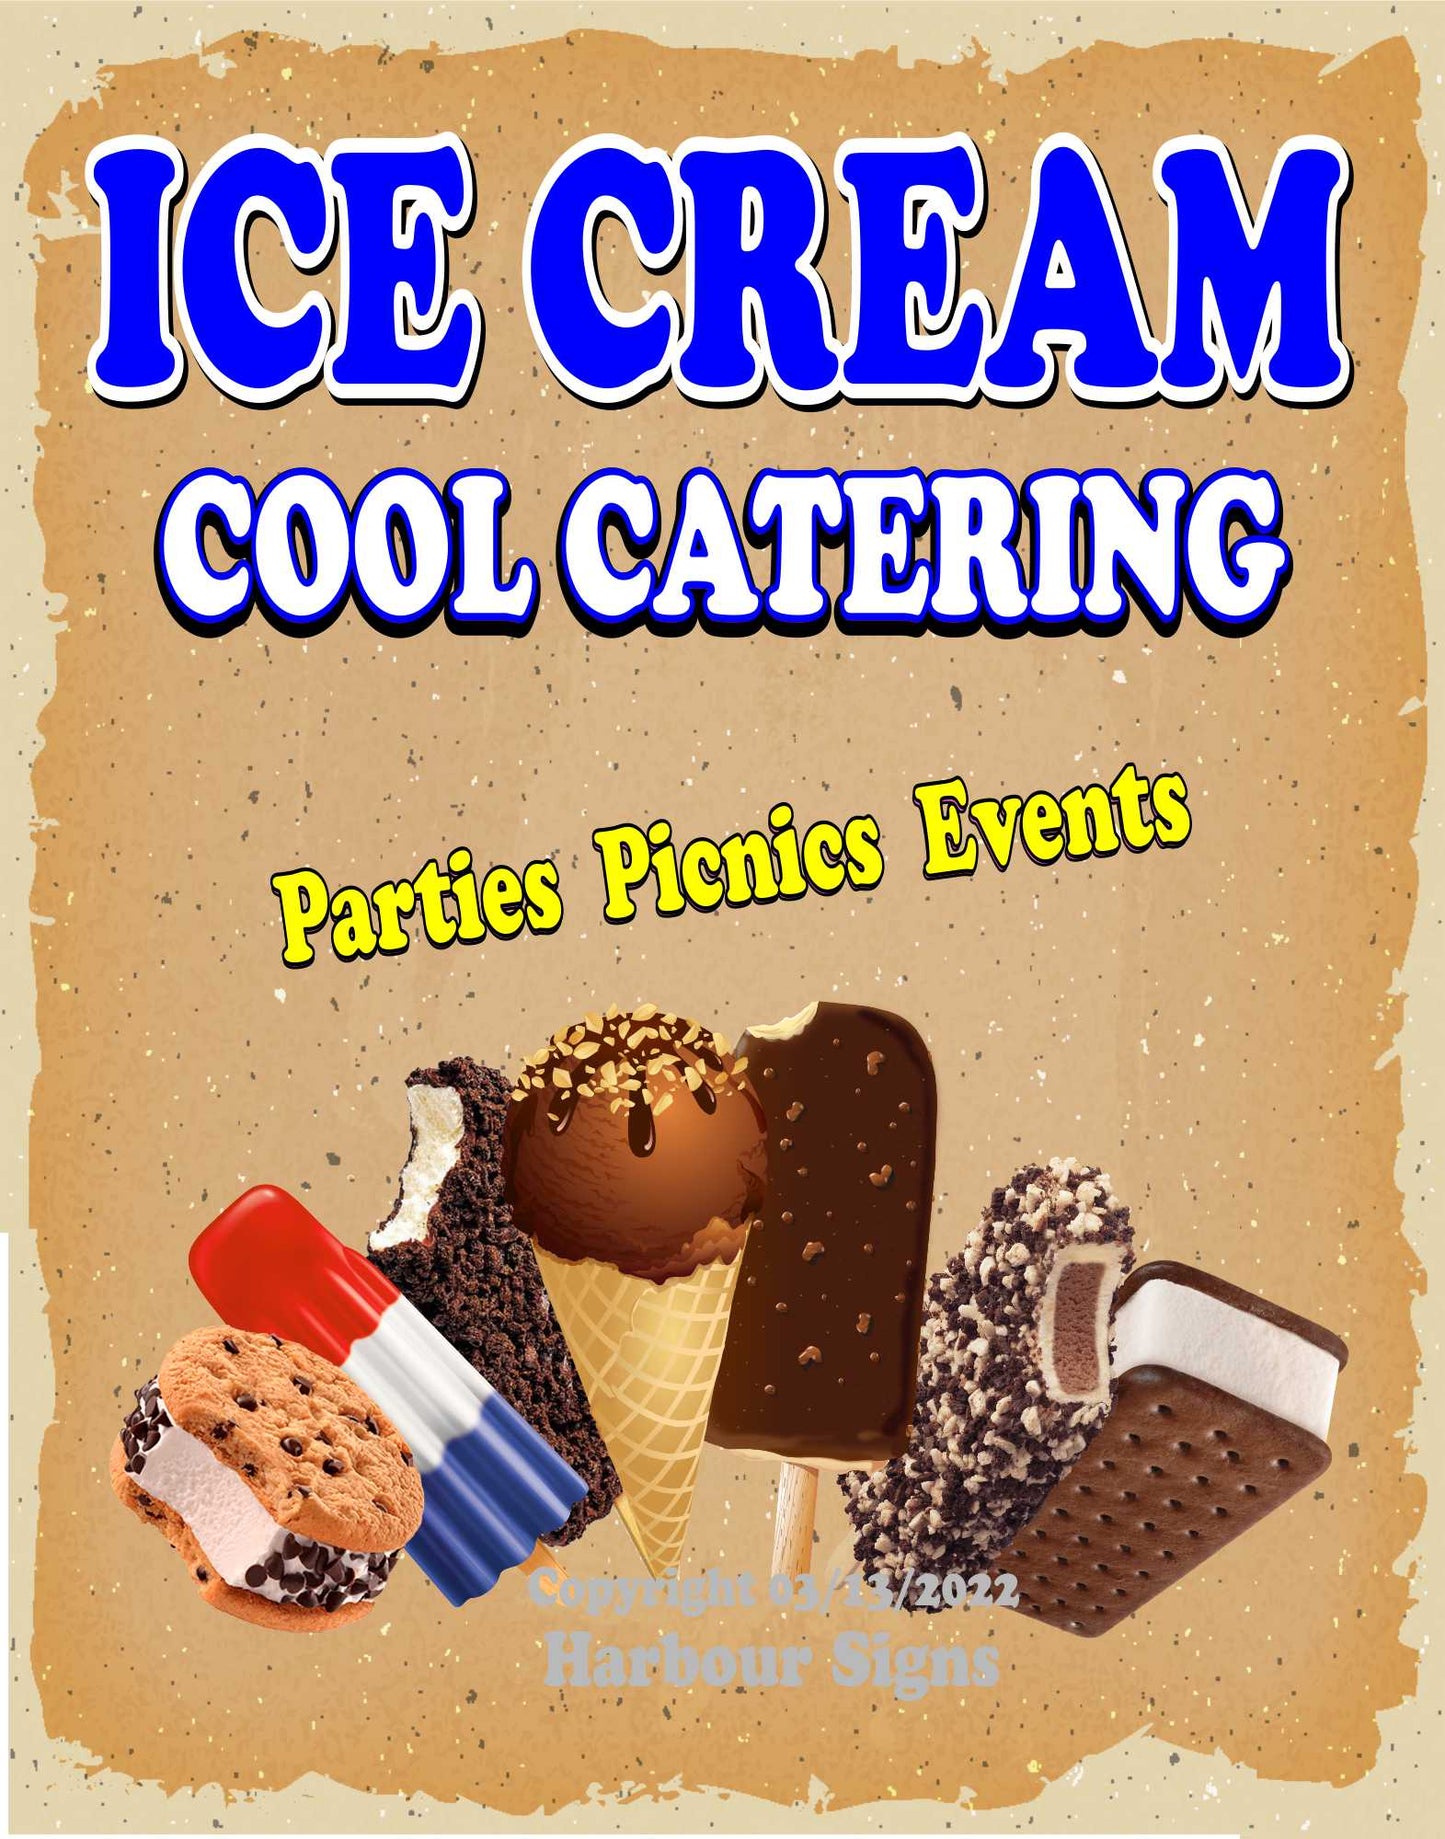 Ice cream Catering Decal Food Truck Concession Vinyl Sticker v